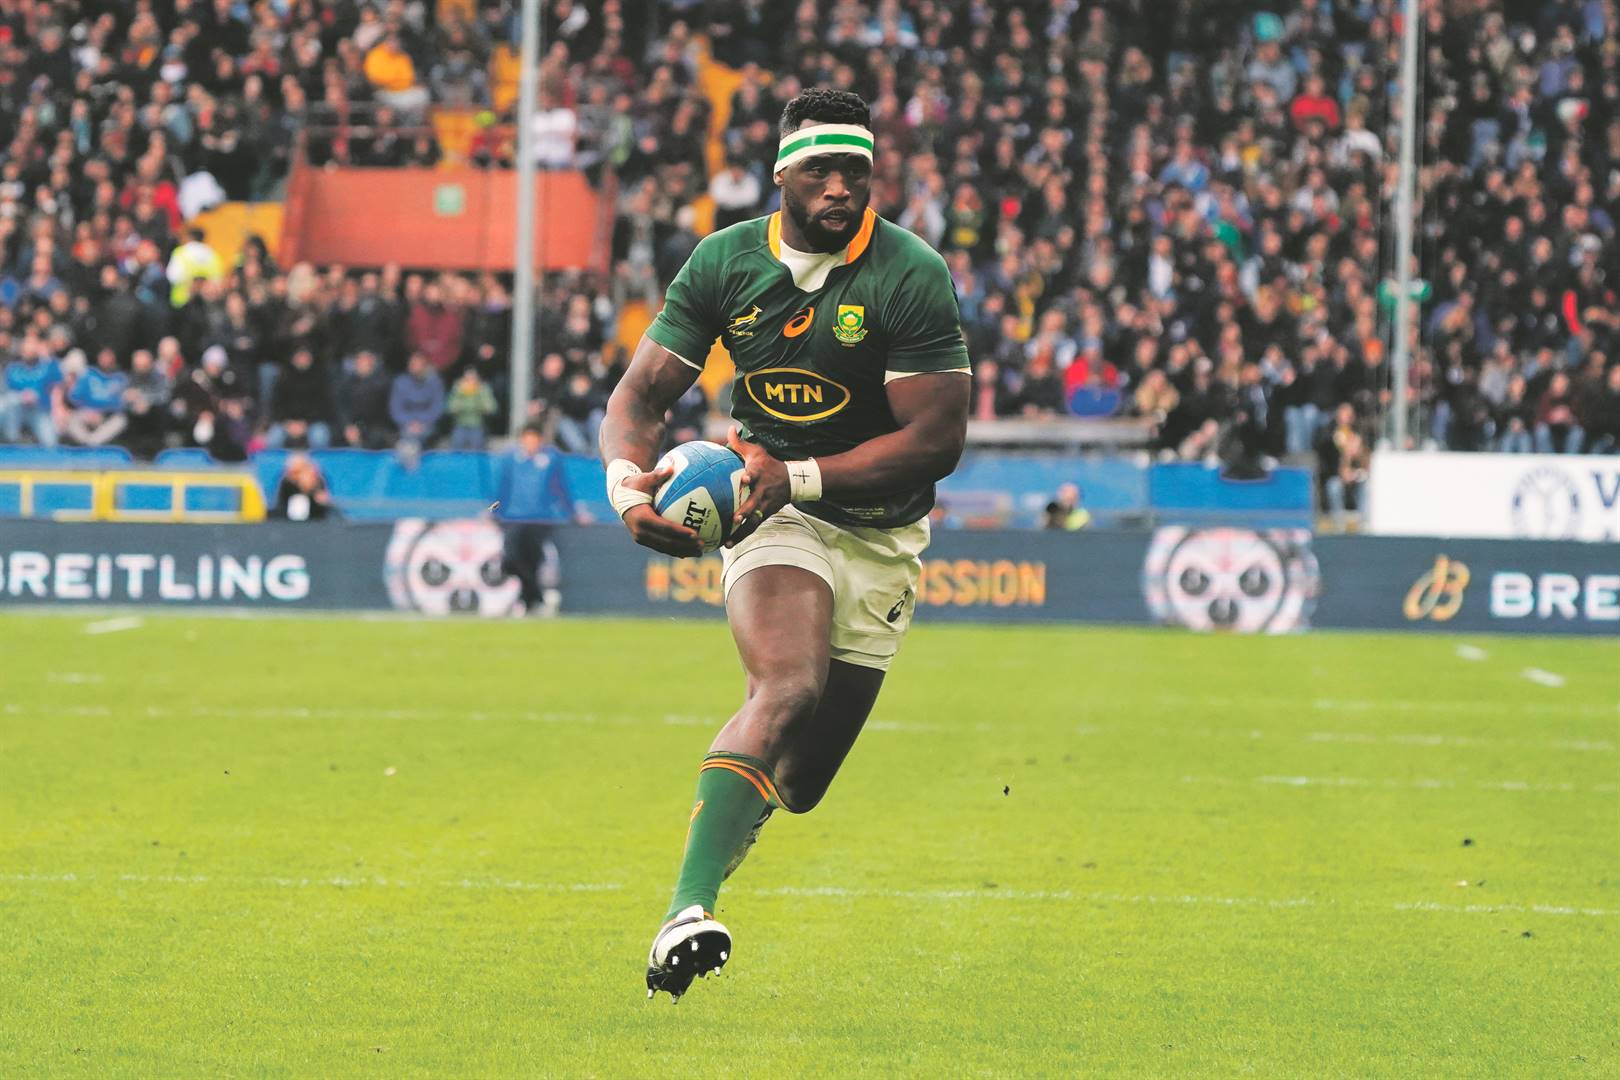 It appears Siya Kolisi might have to face the tough call to relinquish the Bok captaincy with his move to France. Photo: Pier Marco Tacca / Getty Images